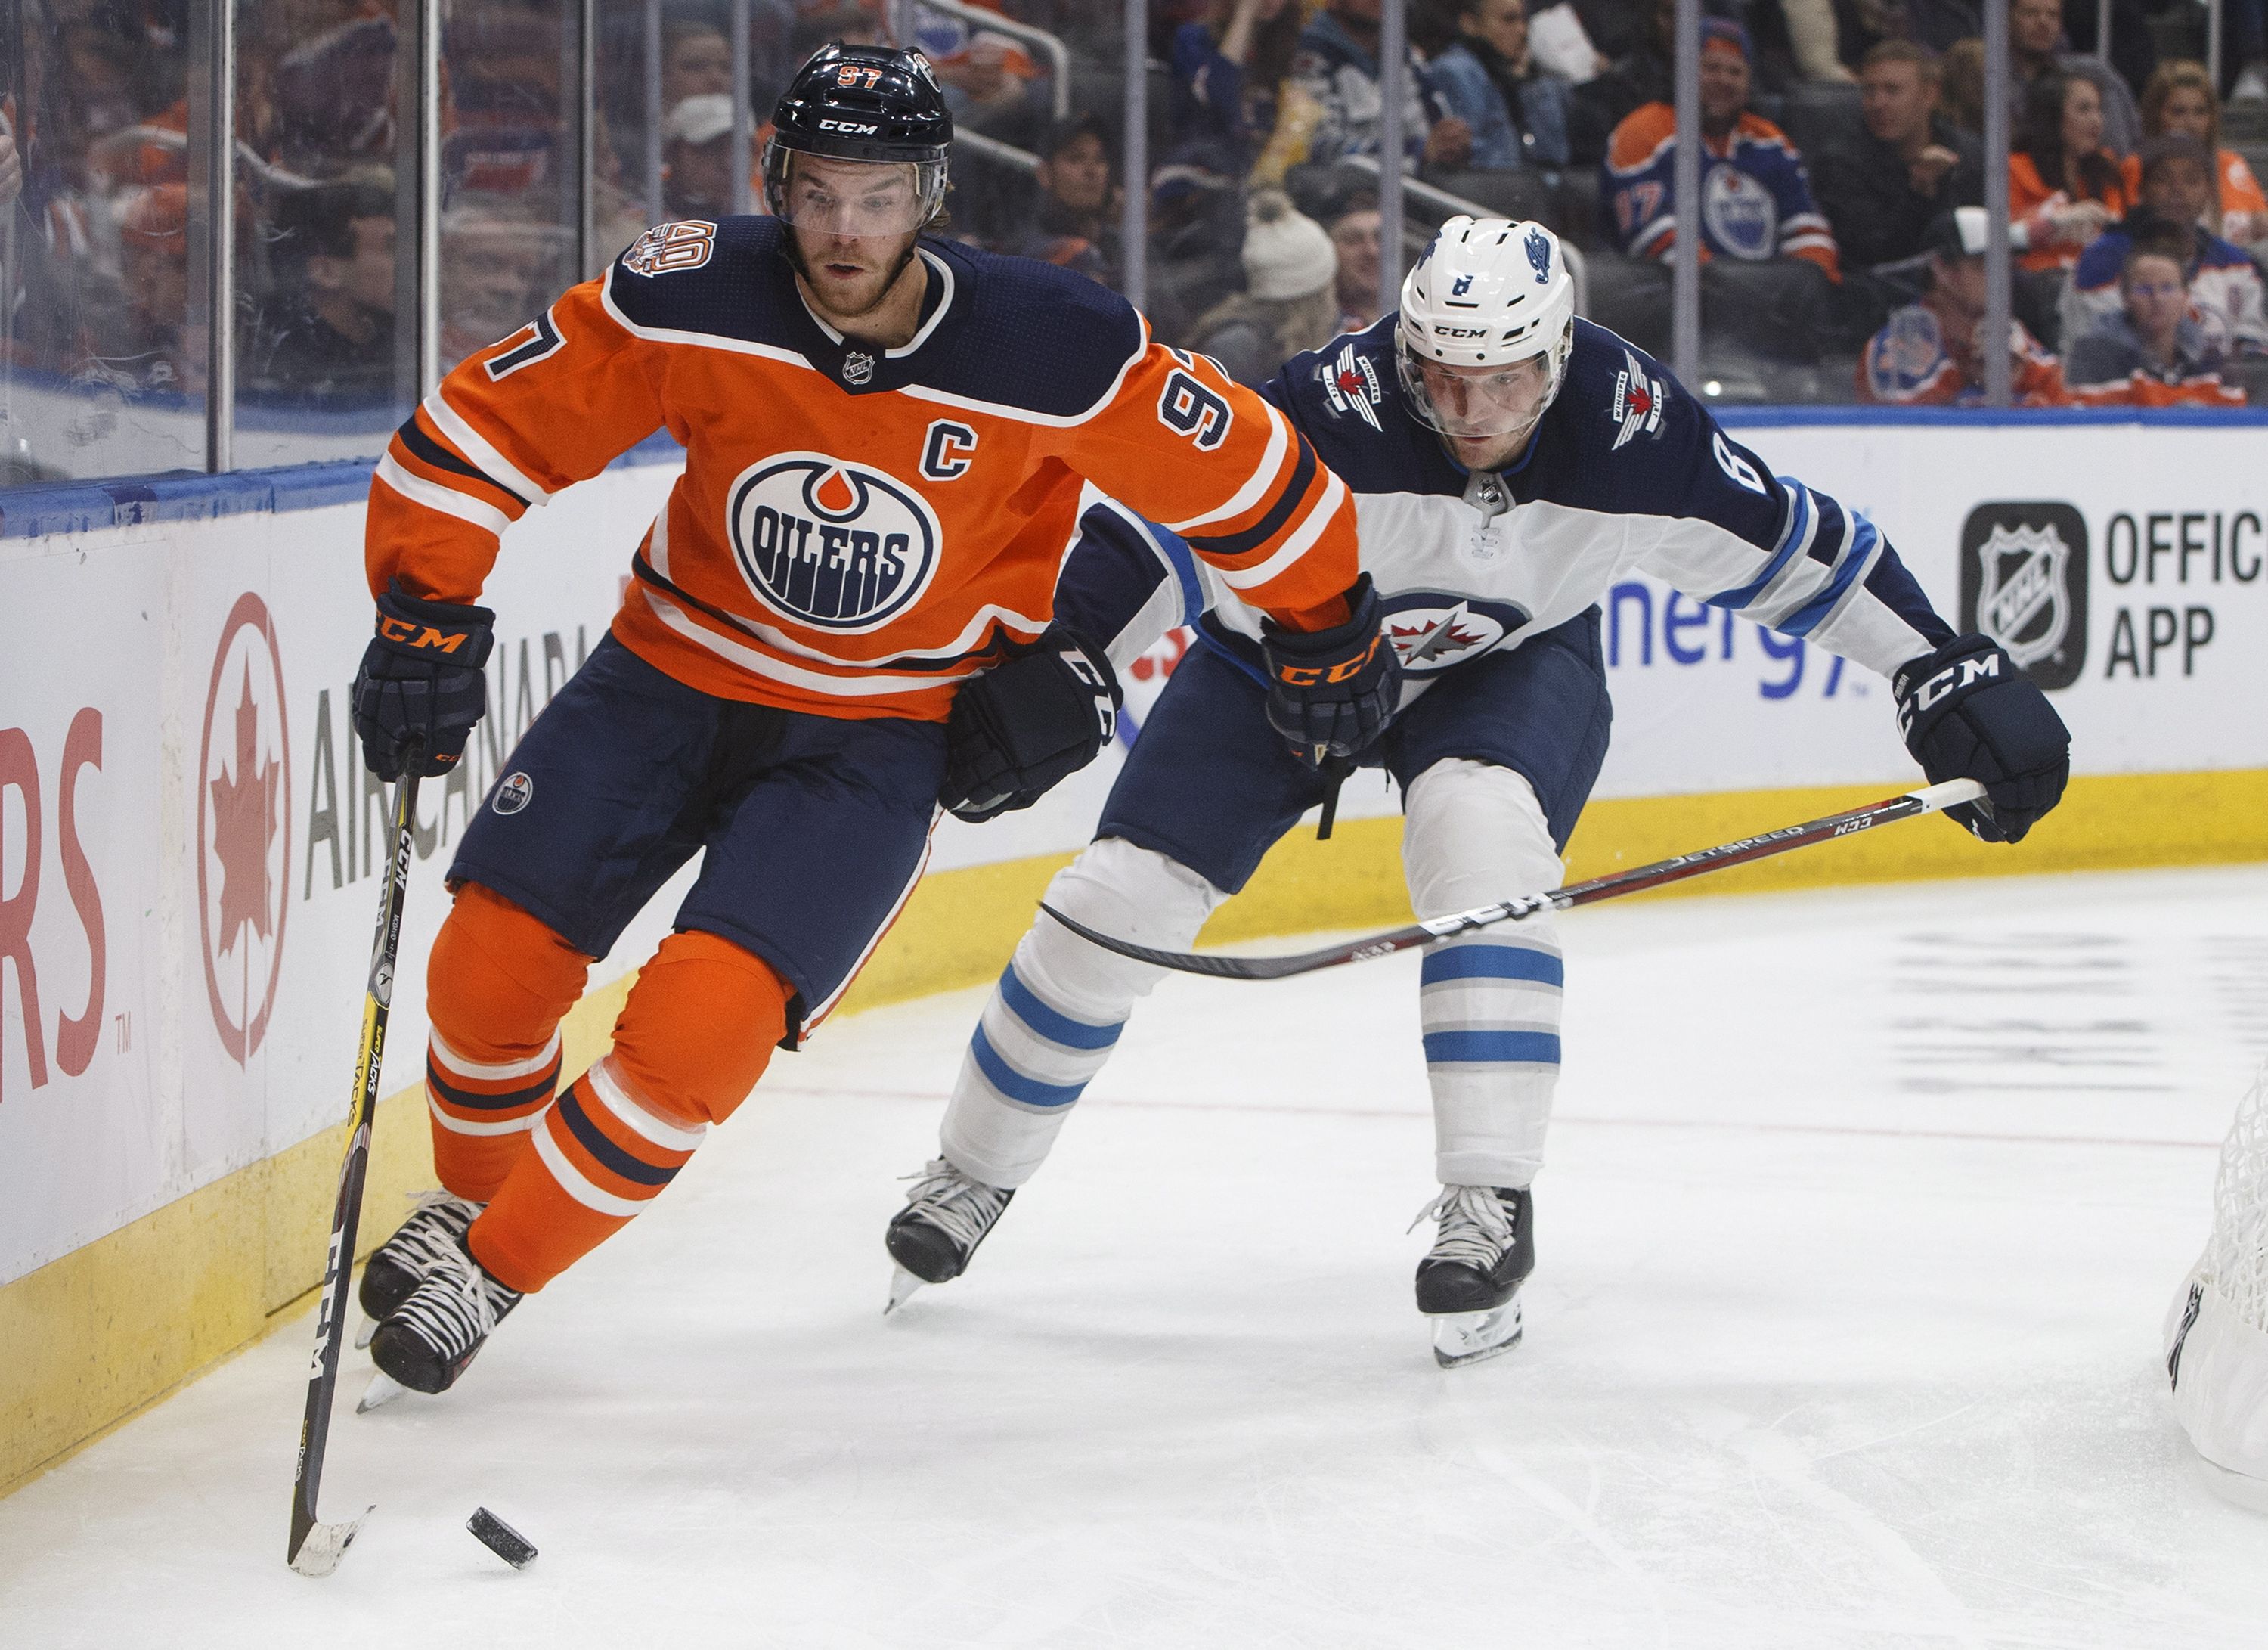 Deprived of NHL postseason, Oilers' Connor McDavid shows out at Worlds